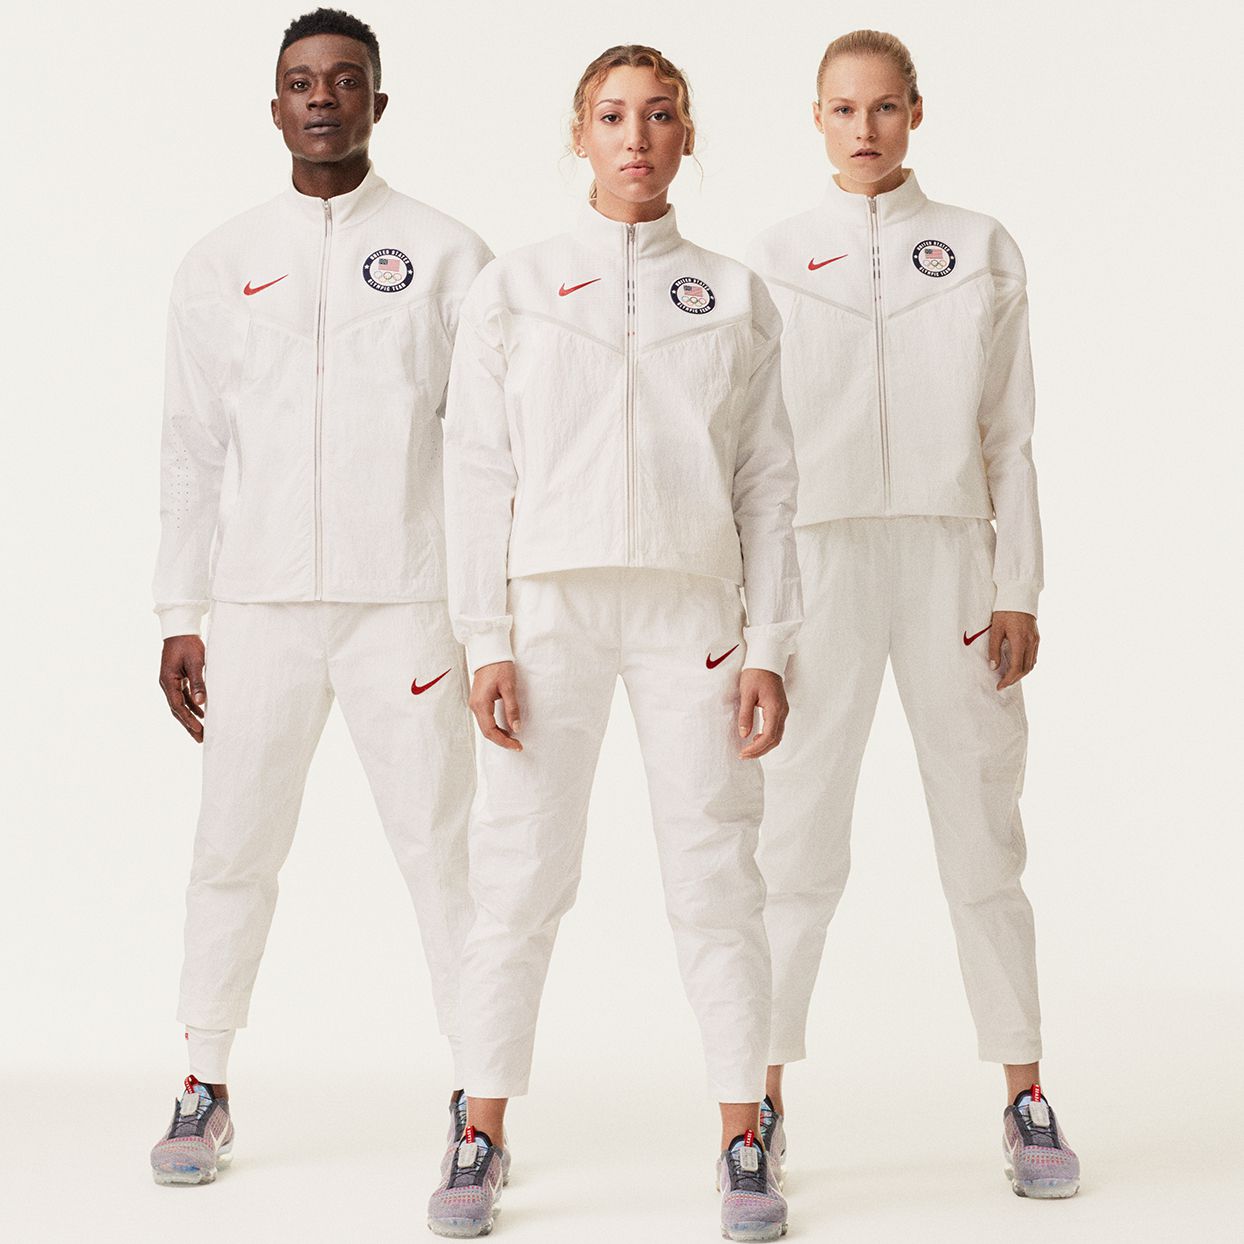 Nike Team USA medal stand outfits